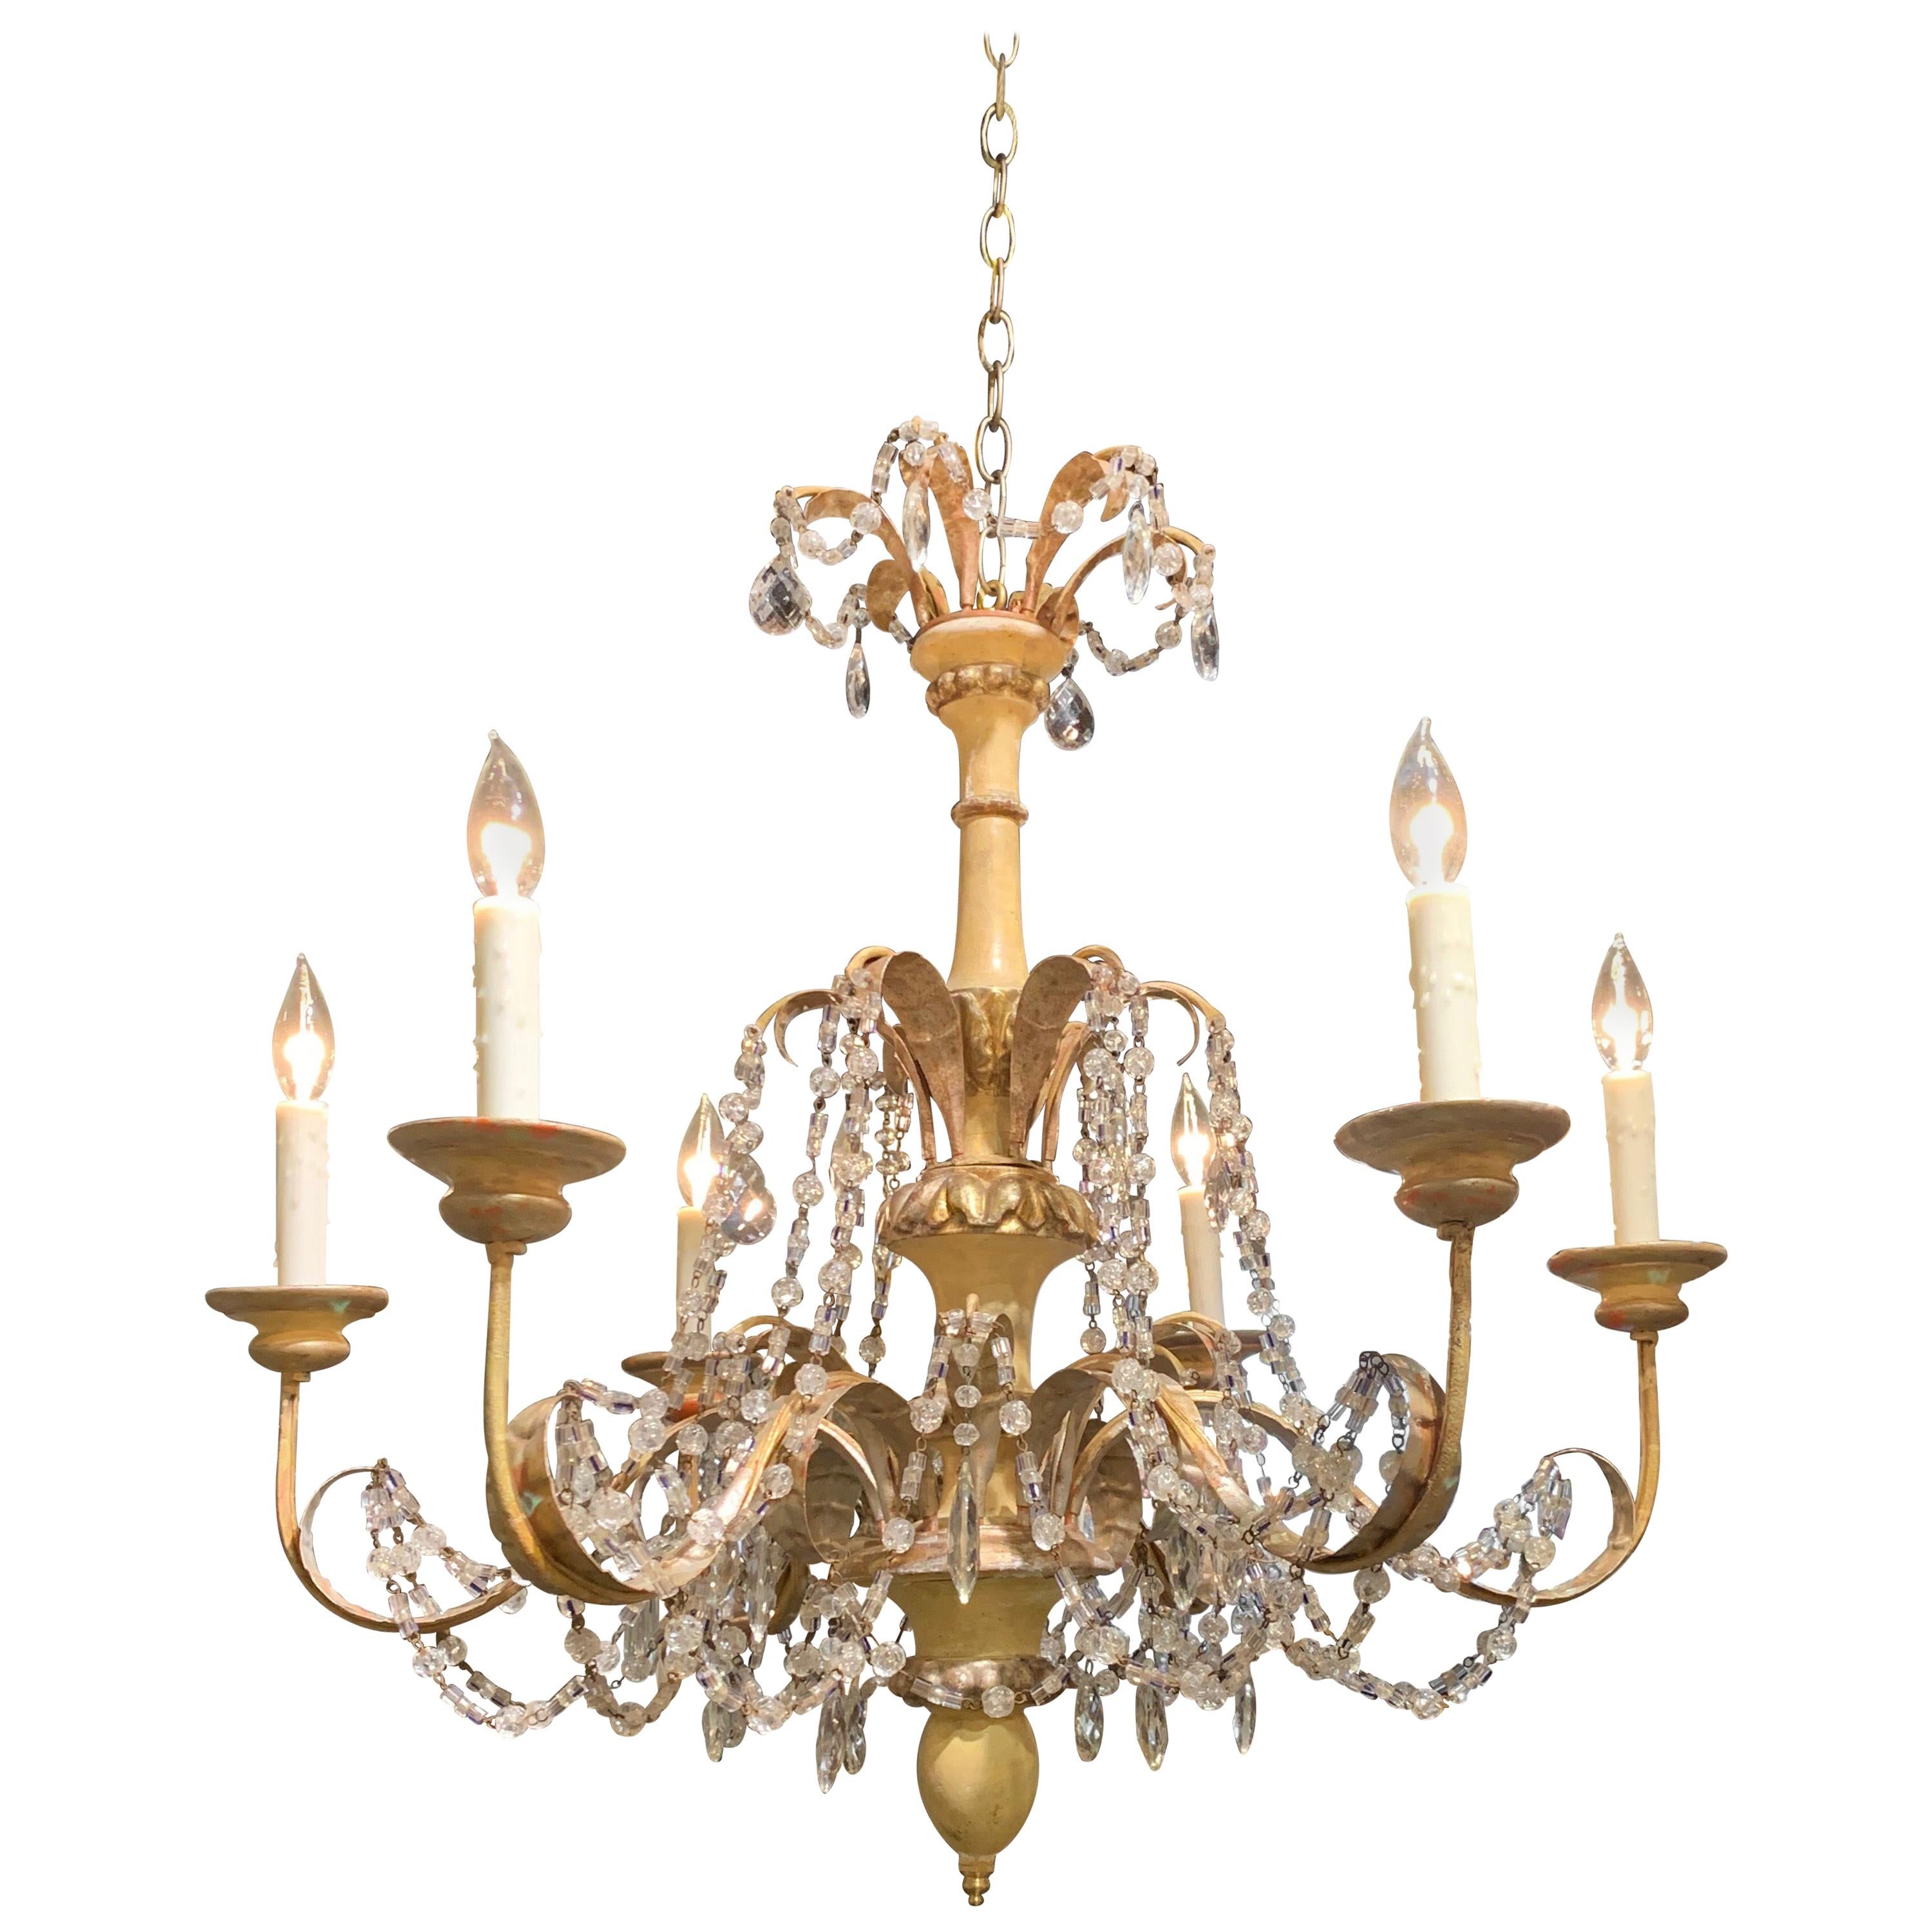 Italian Painted and Giltwood 6-Light Chandelier